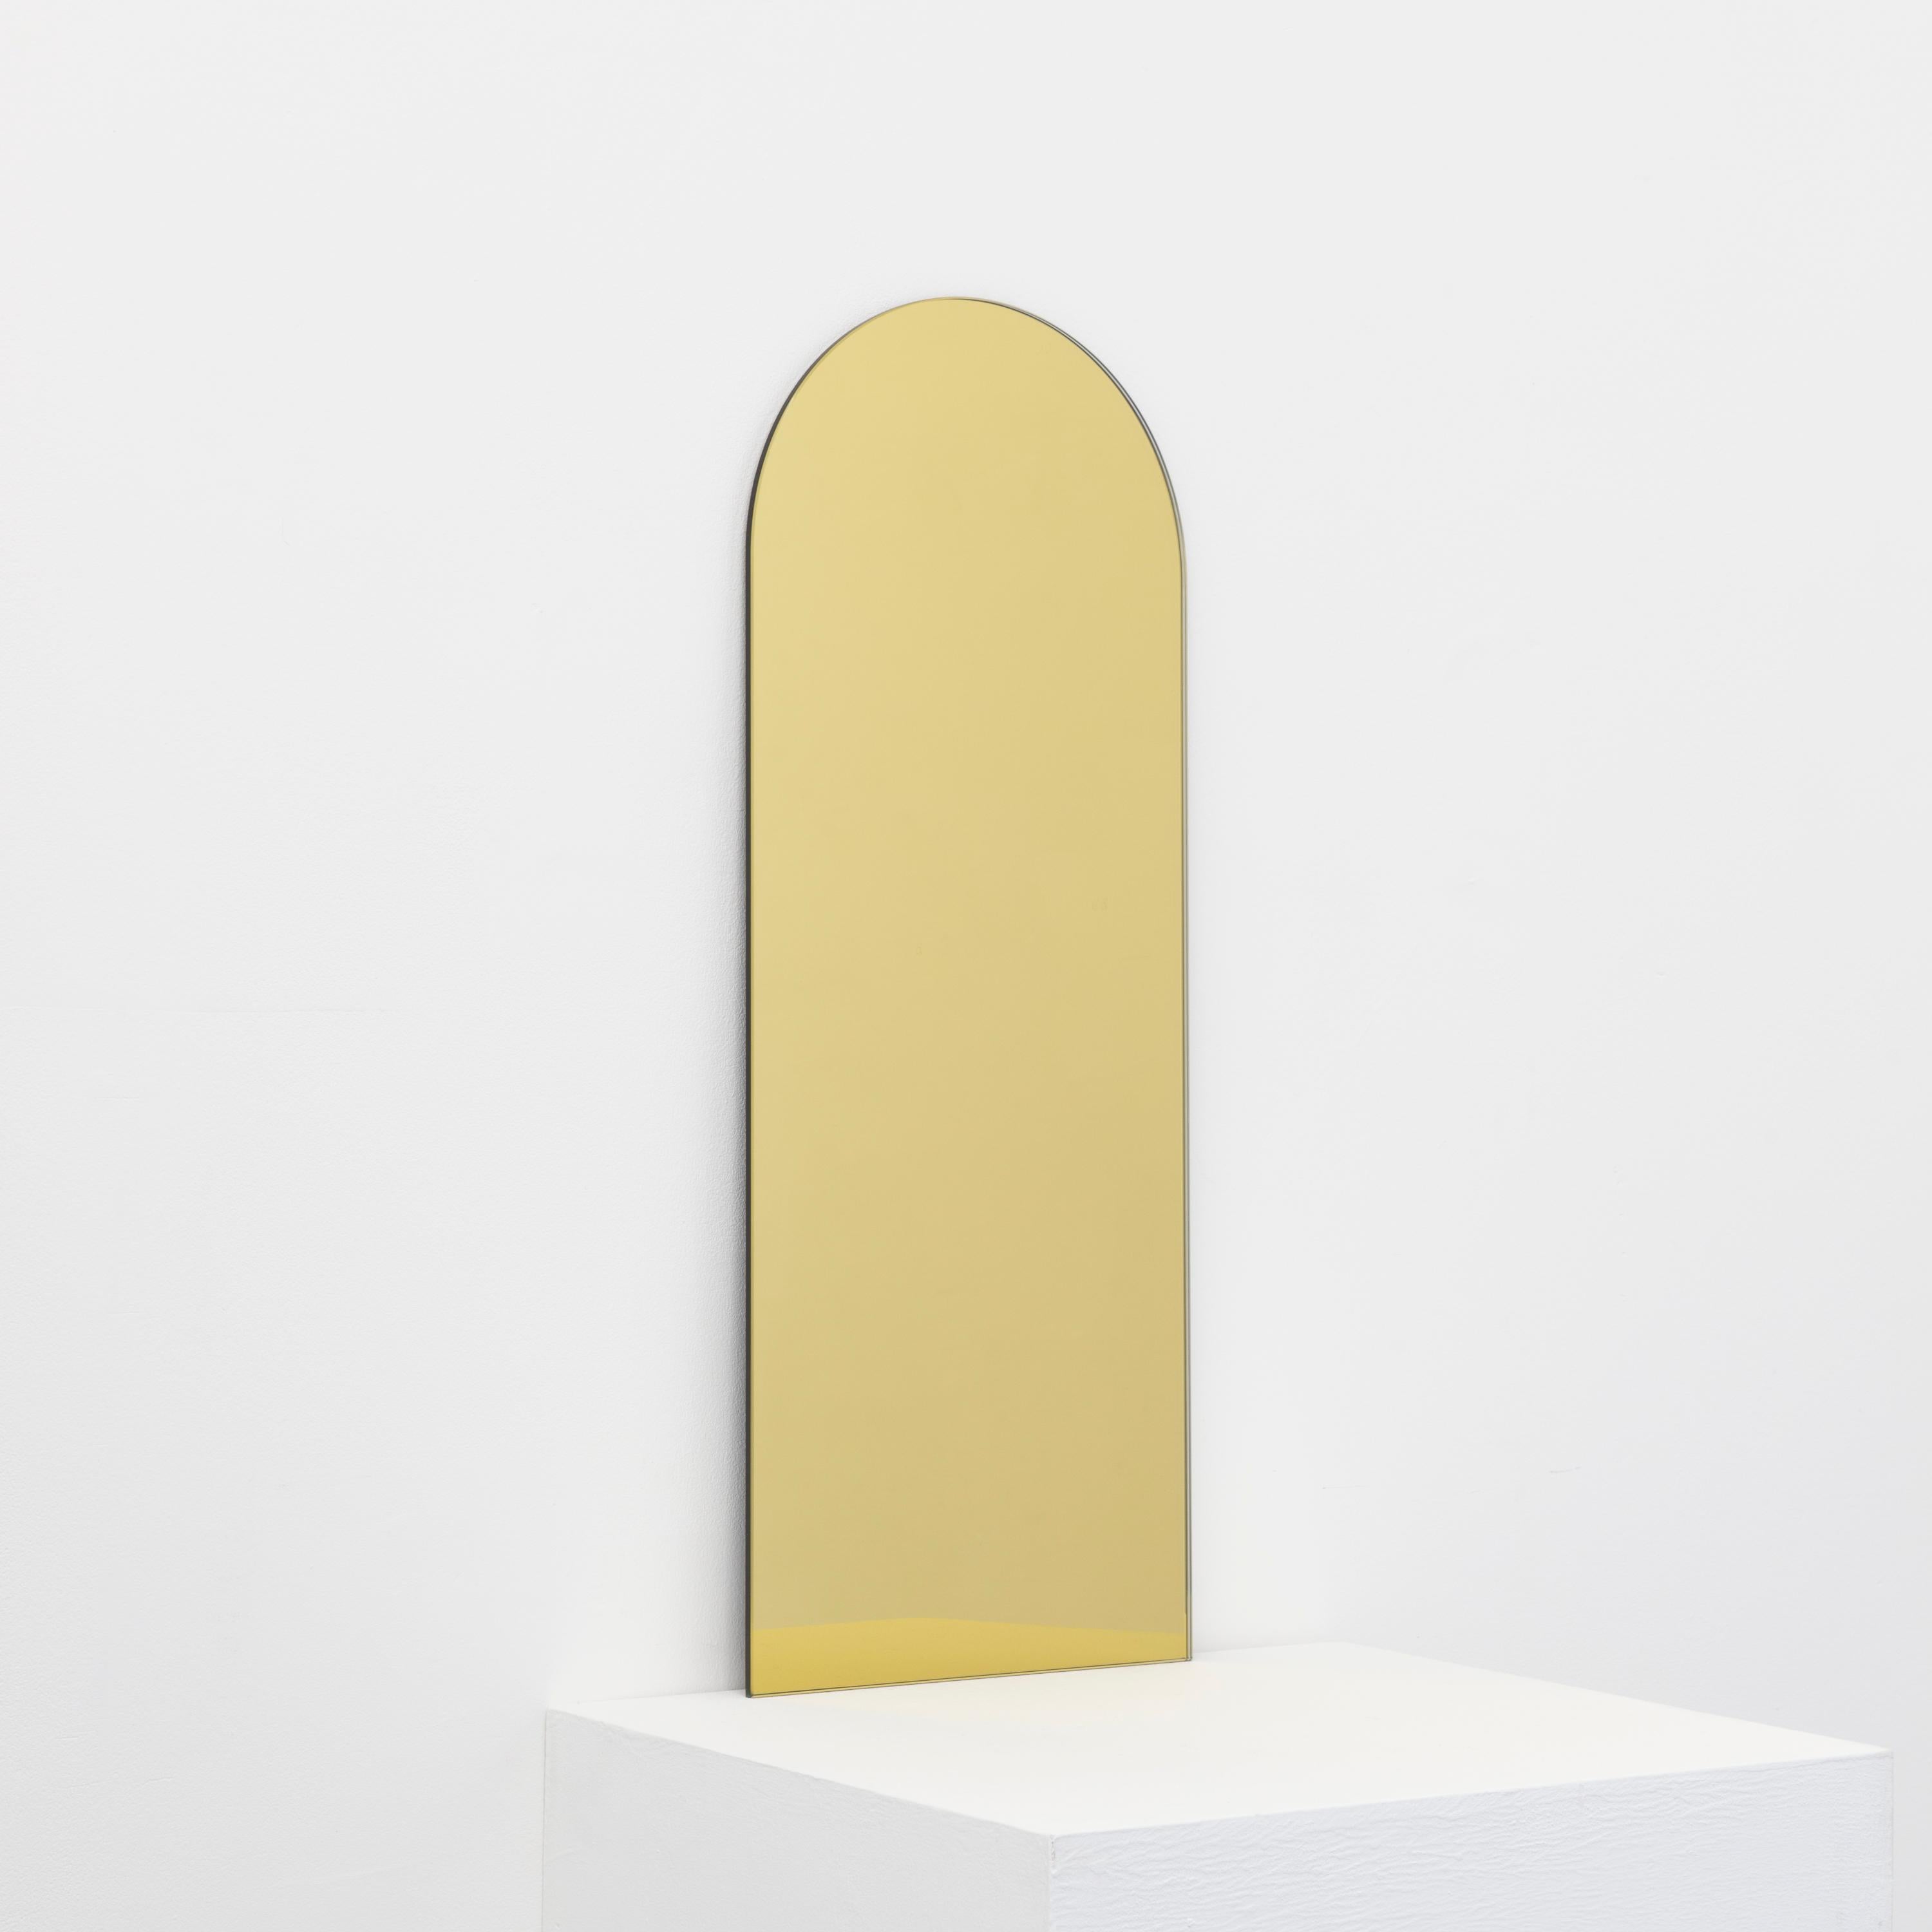 Minimalist Arcus™ arch shaped frameless gold tinted mirror with a floating effect. Quality design that ensures the mirror sits perfectly parallel to the wall. Designed and made in London, UK.

Fitted with professional plates not visible once